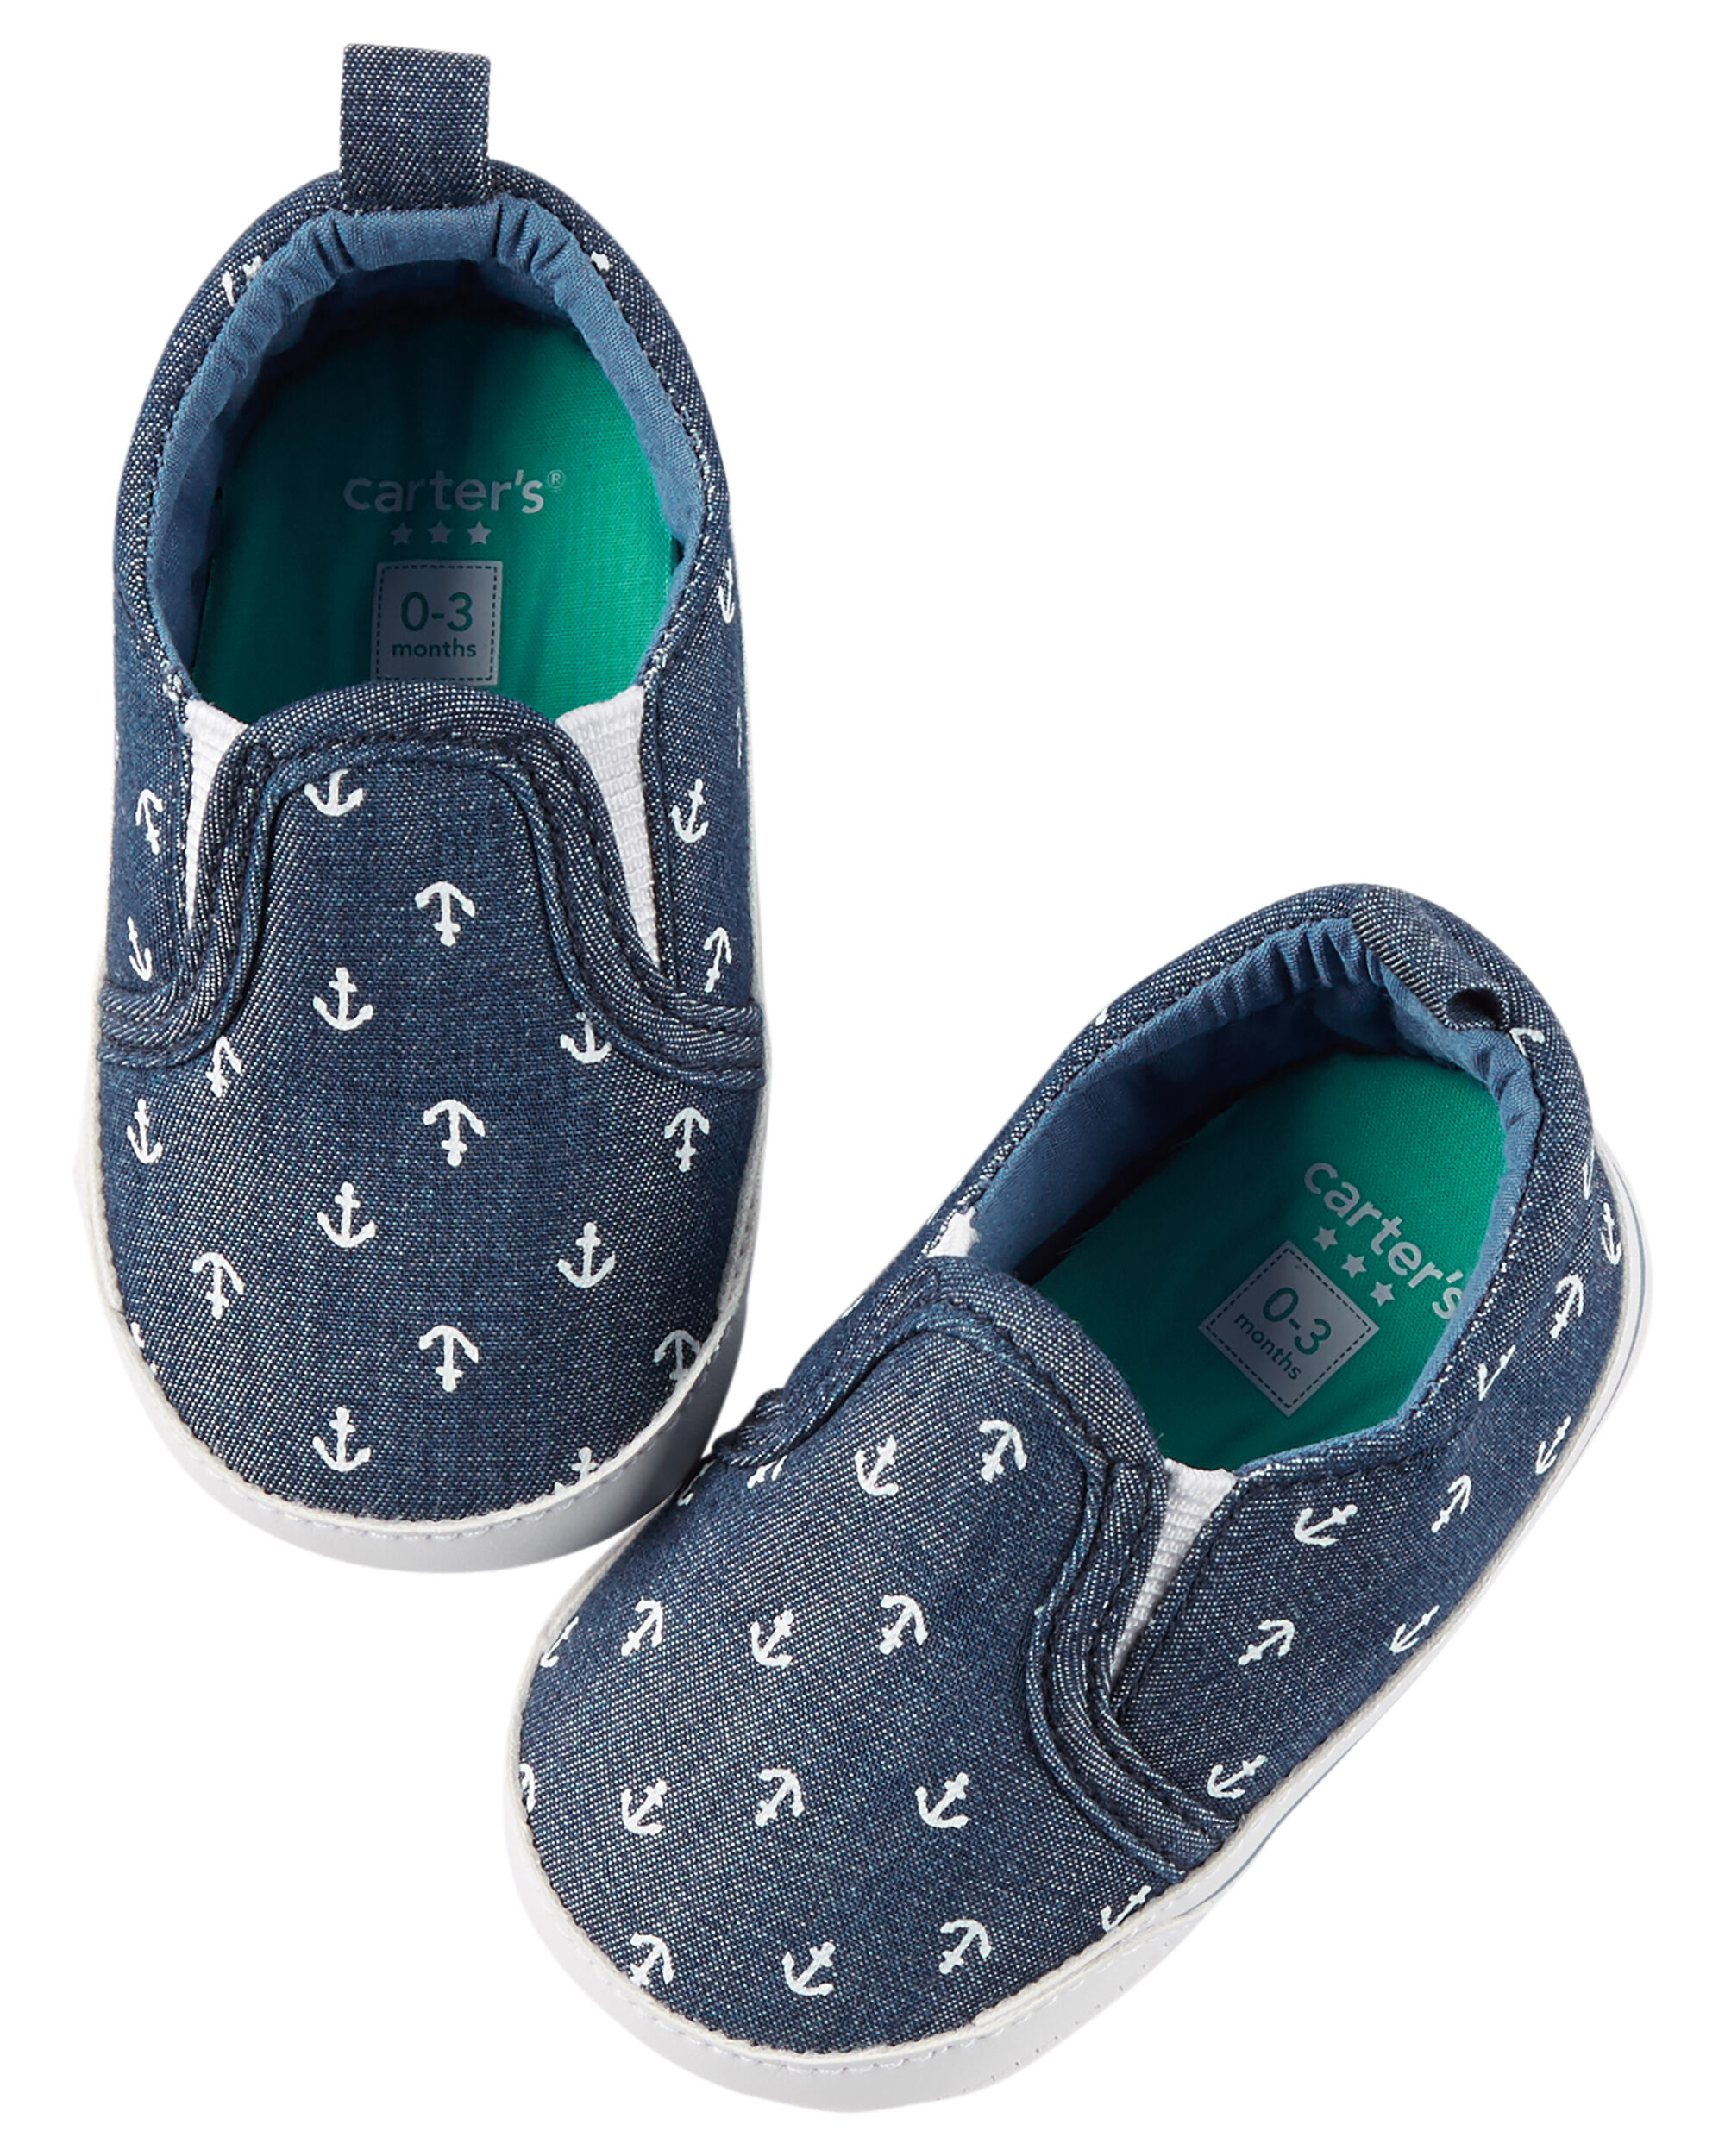 carters crib shoes